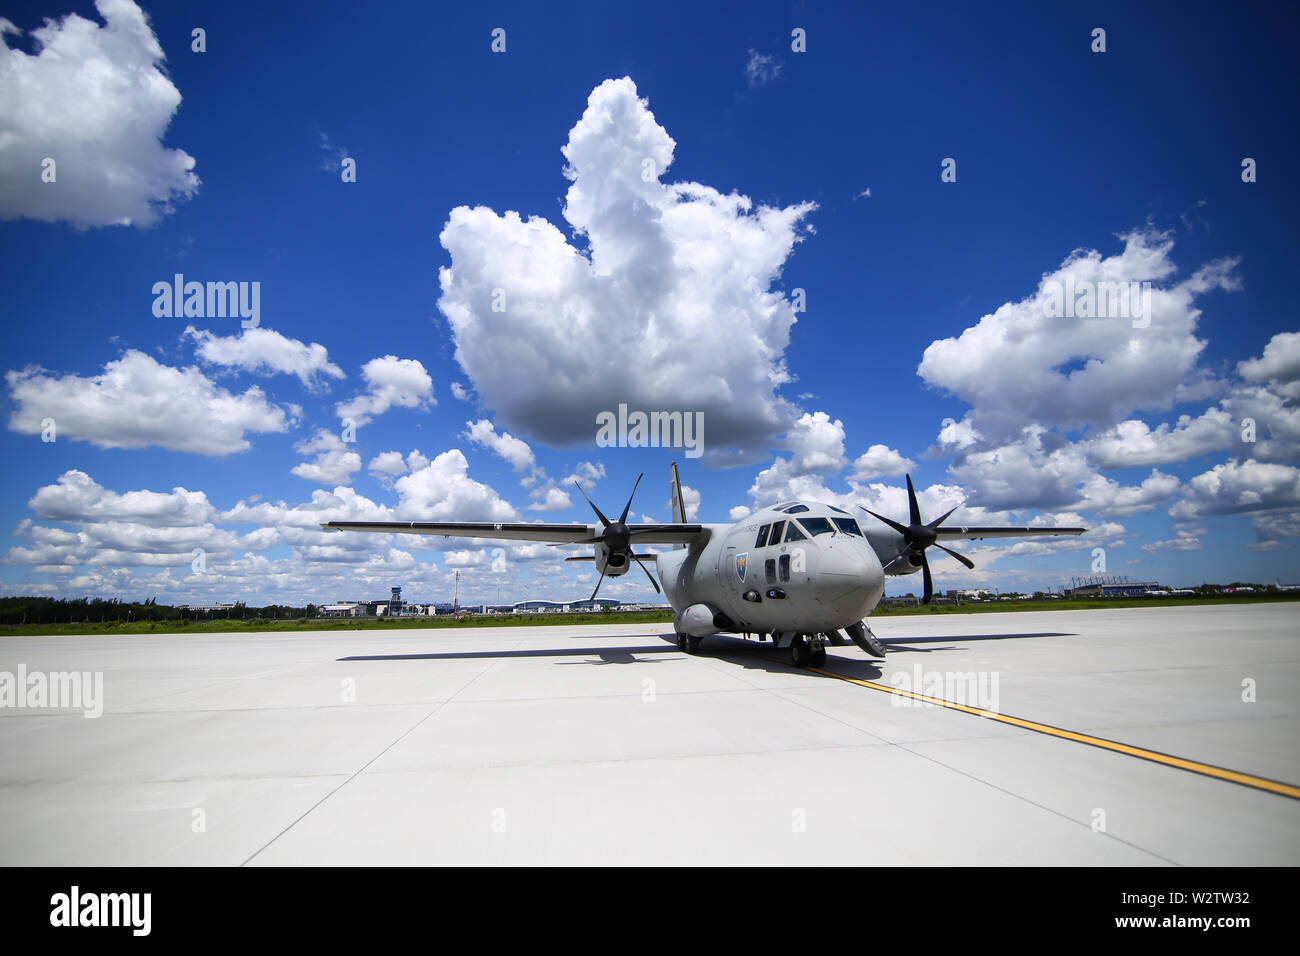 Otopeni, Romania - May 22, 2019: Alenia C-27J Spartan military cargo plane from the Romanian Air Force landed in an airbase during a drill. Stock Photo